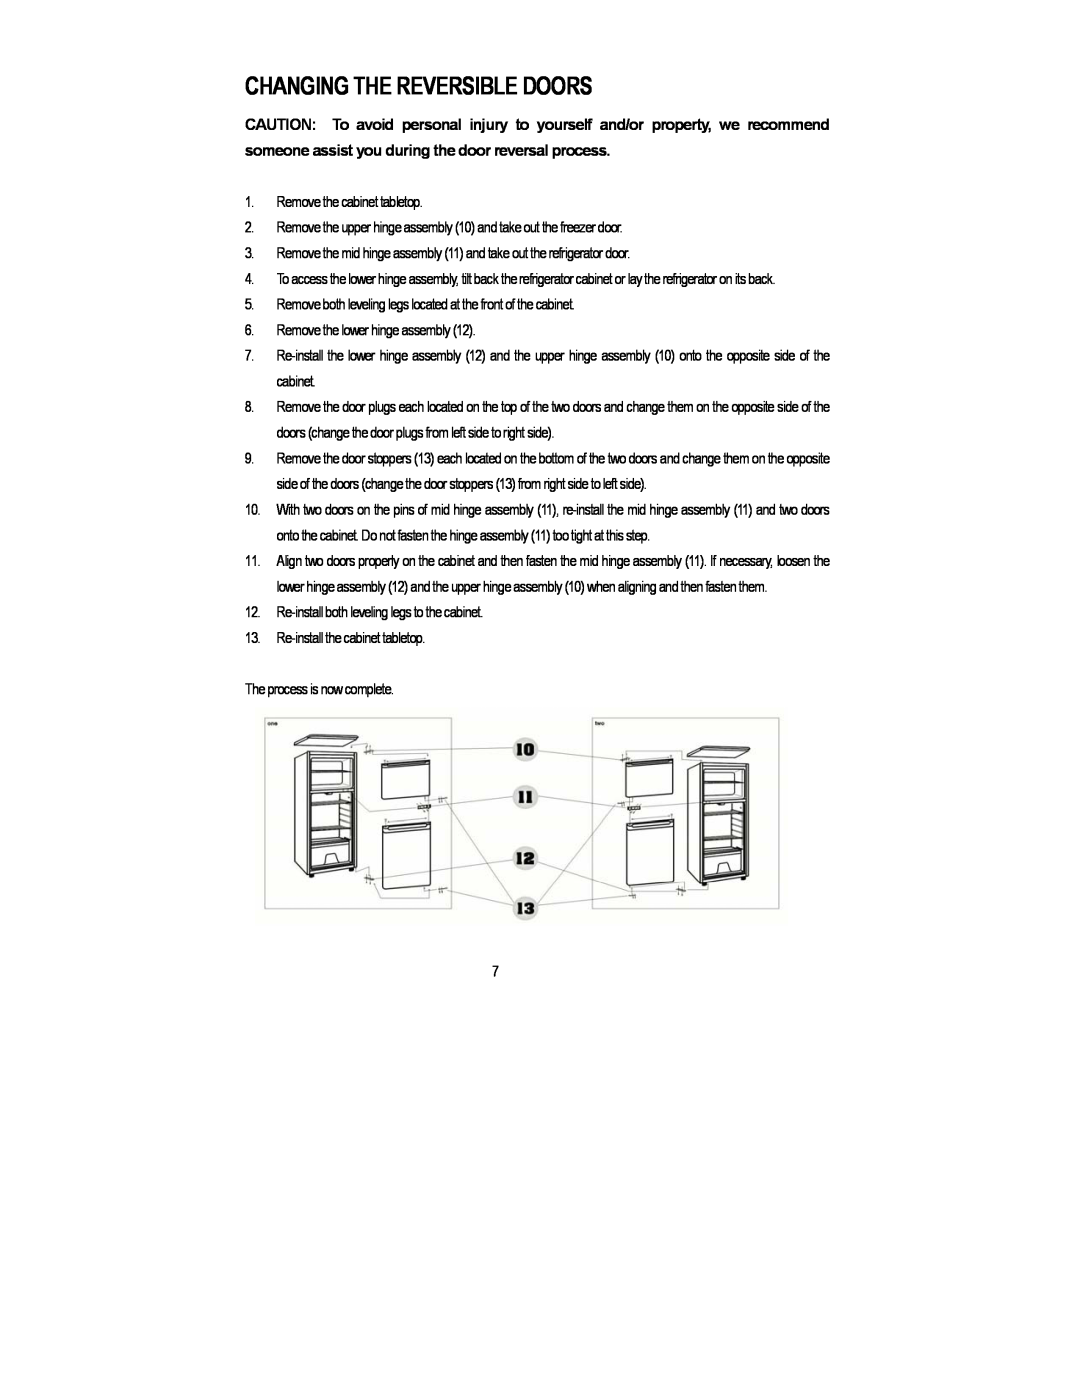 Magic Chef MCBR402S instruction manual Changing The Reversible Doors 